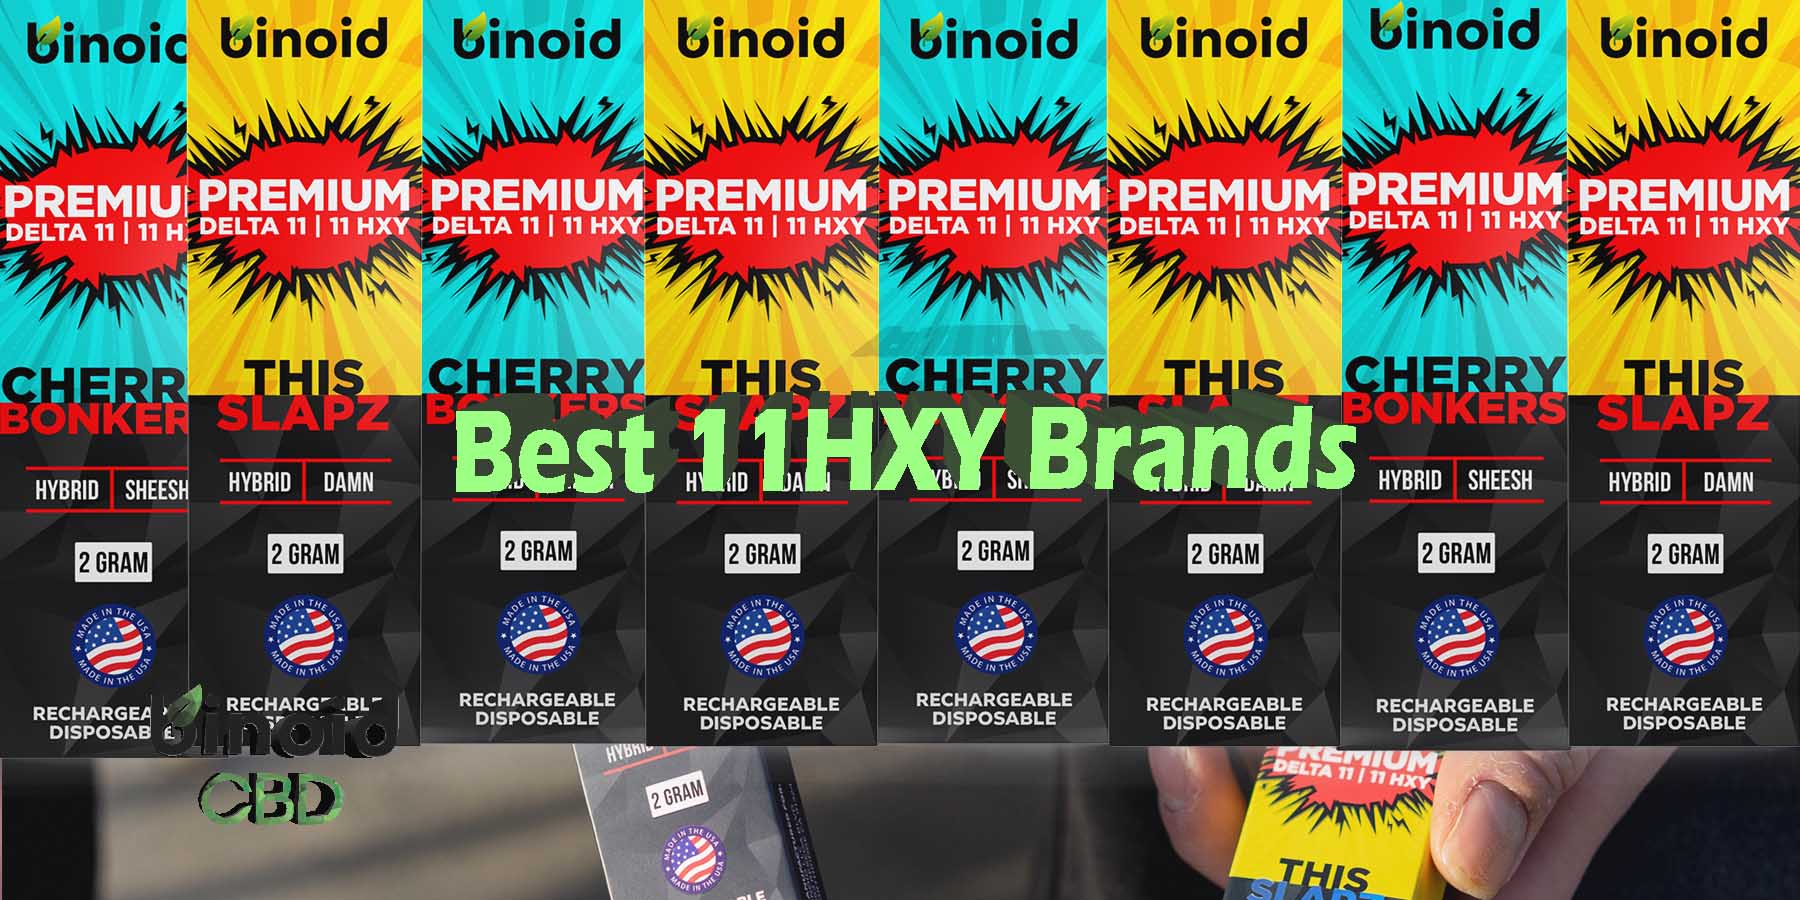 Best 11HXY Brands Review Take Work Online Best Brand Price Get Near Me Lowest Coupon Discount Store Shop Vapes Carts Online Strongest Smoke Shop Binoid